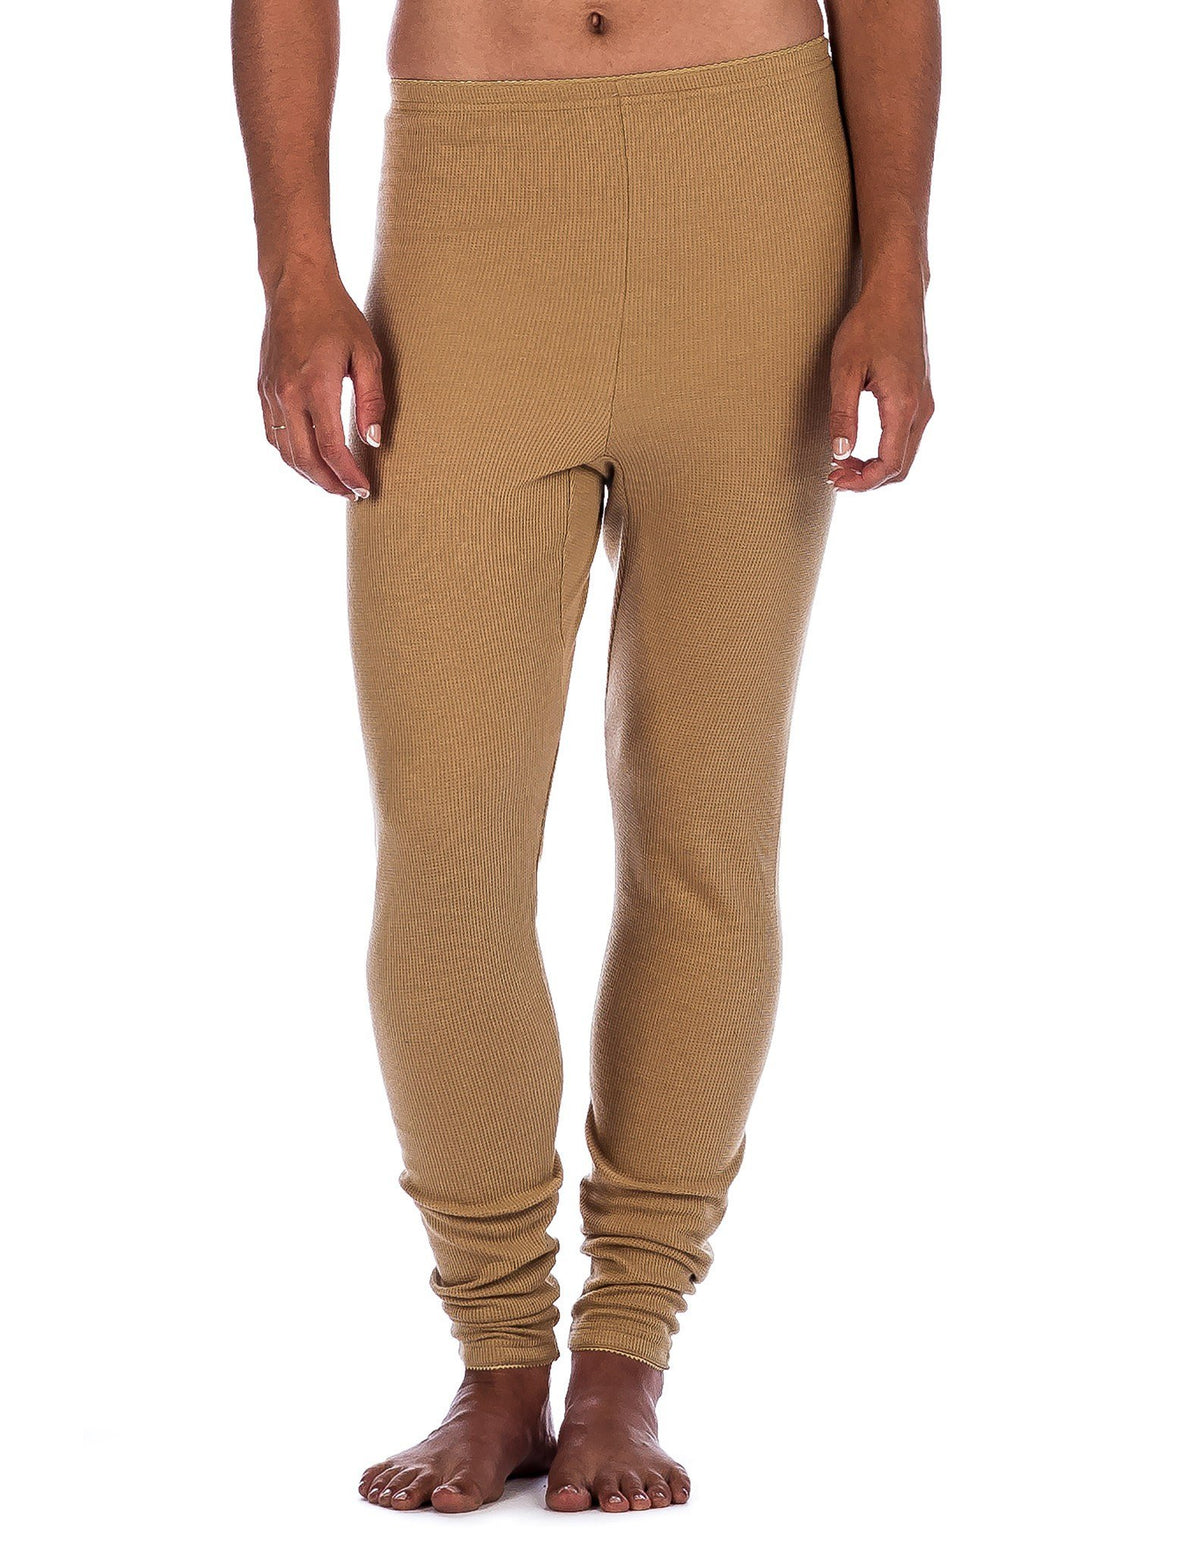 Women's Extreme Cold Waffle Knit Thermal Long John Pants - Champagne